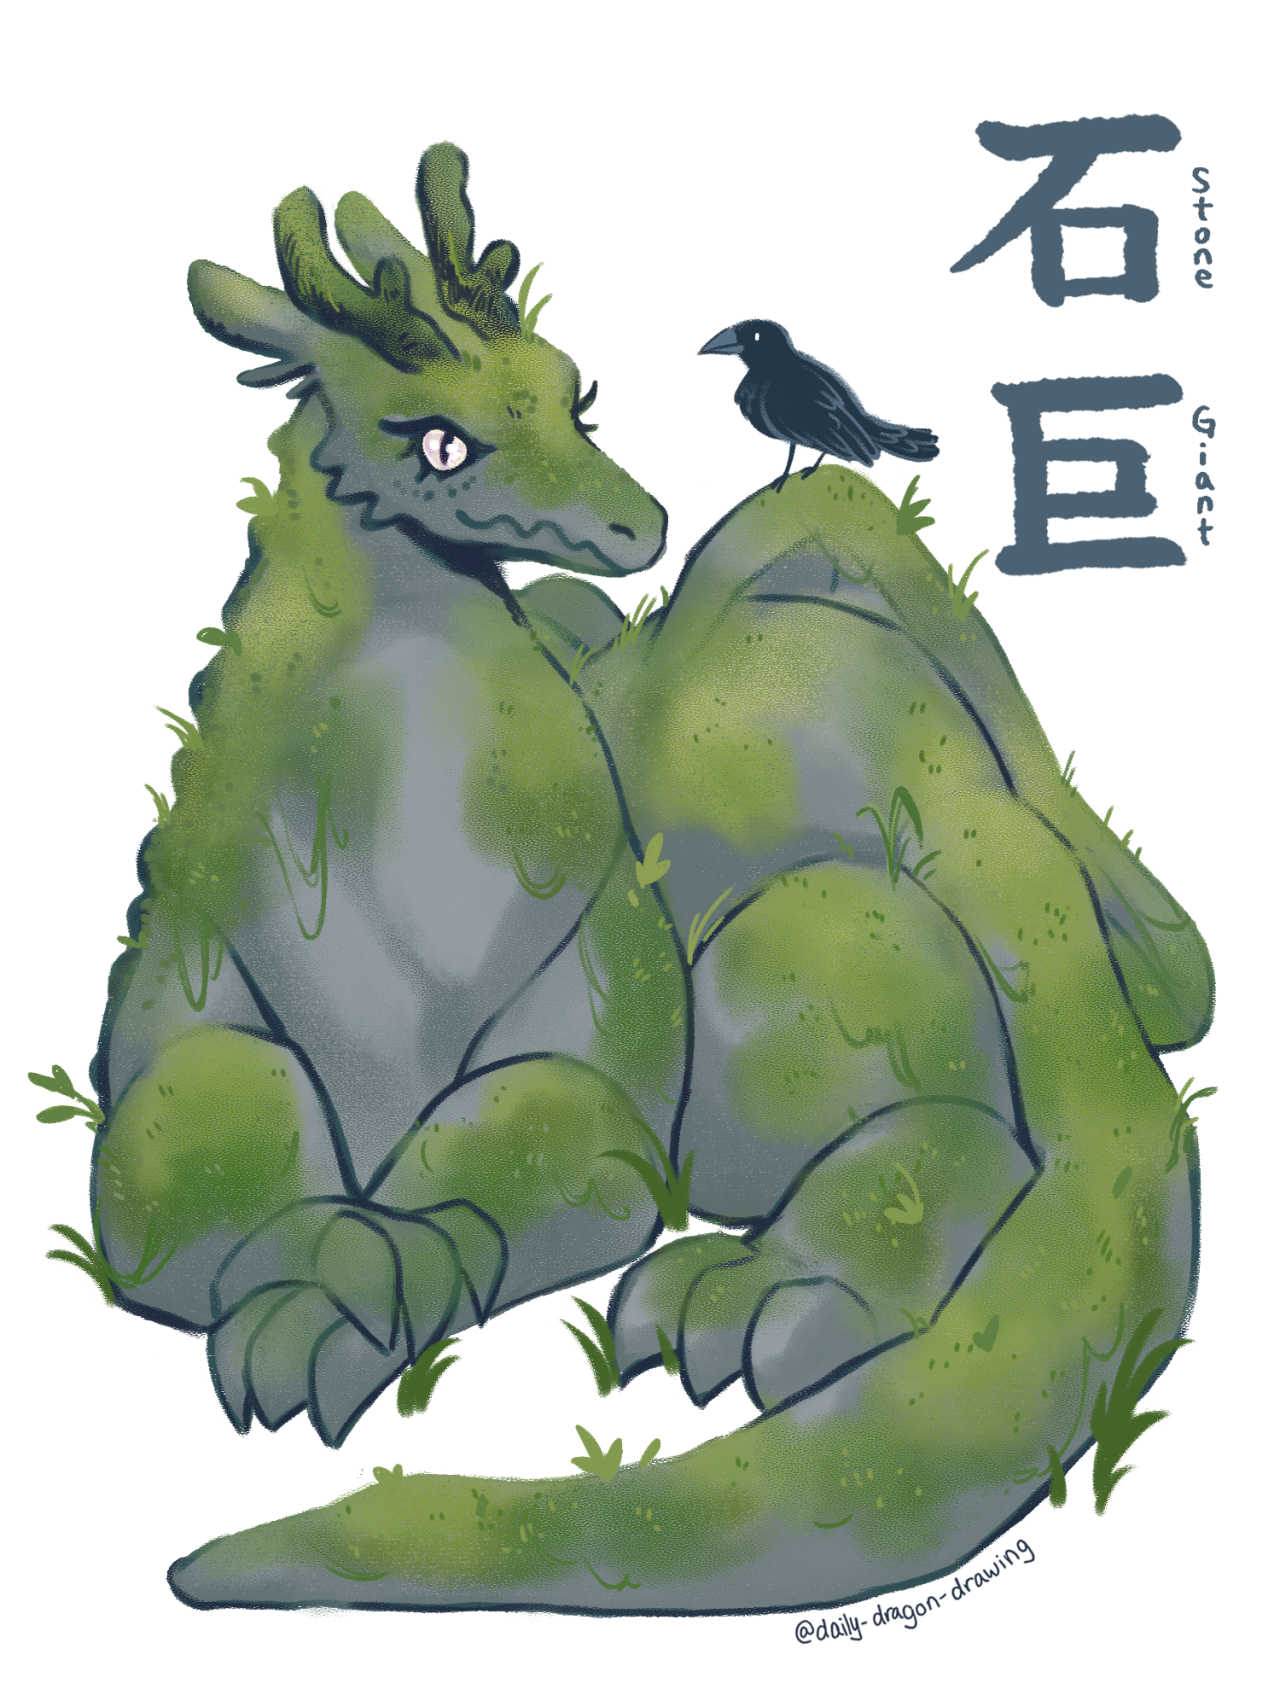 Illustration of a large gray dragon made of stone, covered in green moss and some grass. It has thick, rocky horns and quartz-like eyes. The dragon's head is turned towards a raven that is standing on its back. To the right, vertical text reads "石巨 Stone Giant" and near the bottom of the image, an artist signature, "@daily-dragon-drawing"